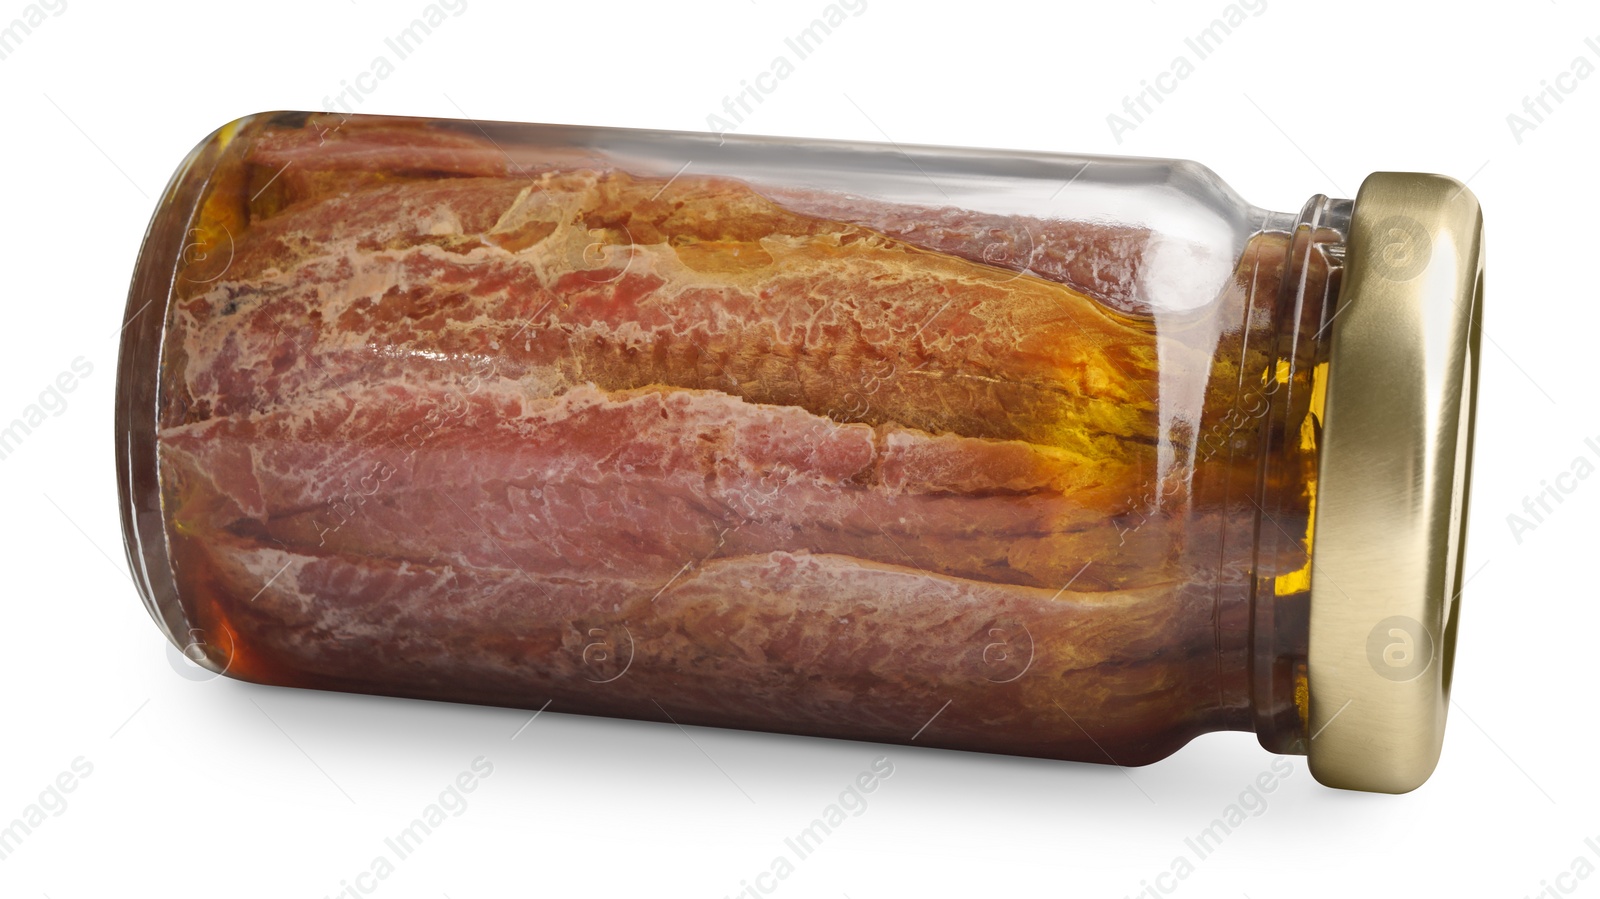 Photo of Jar with anchovy fillets in oil isolated on white